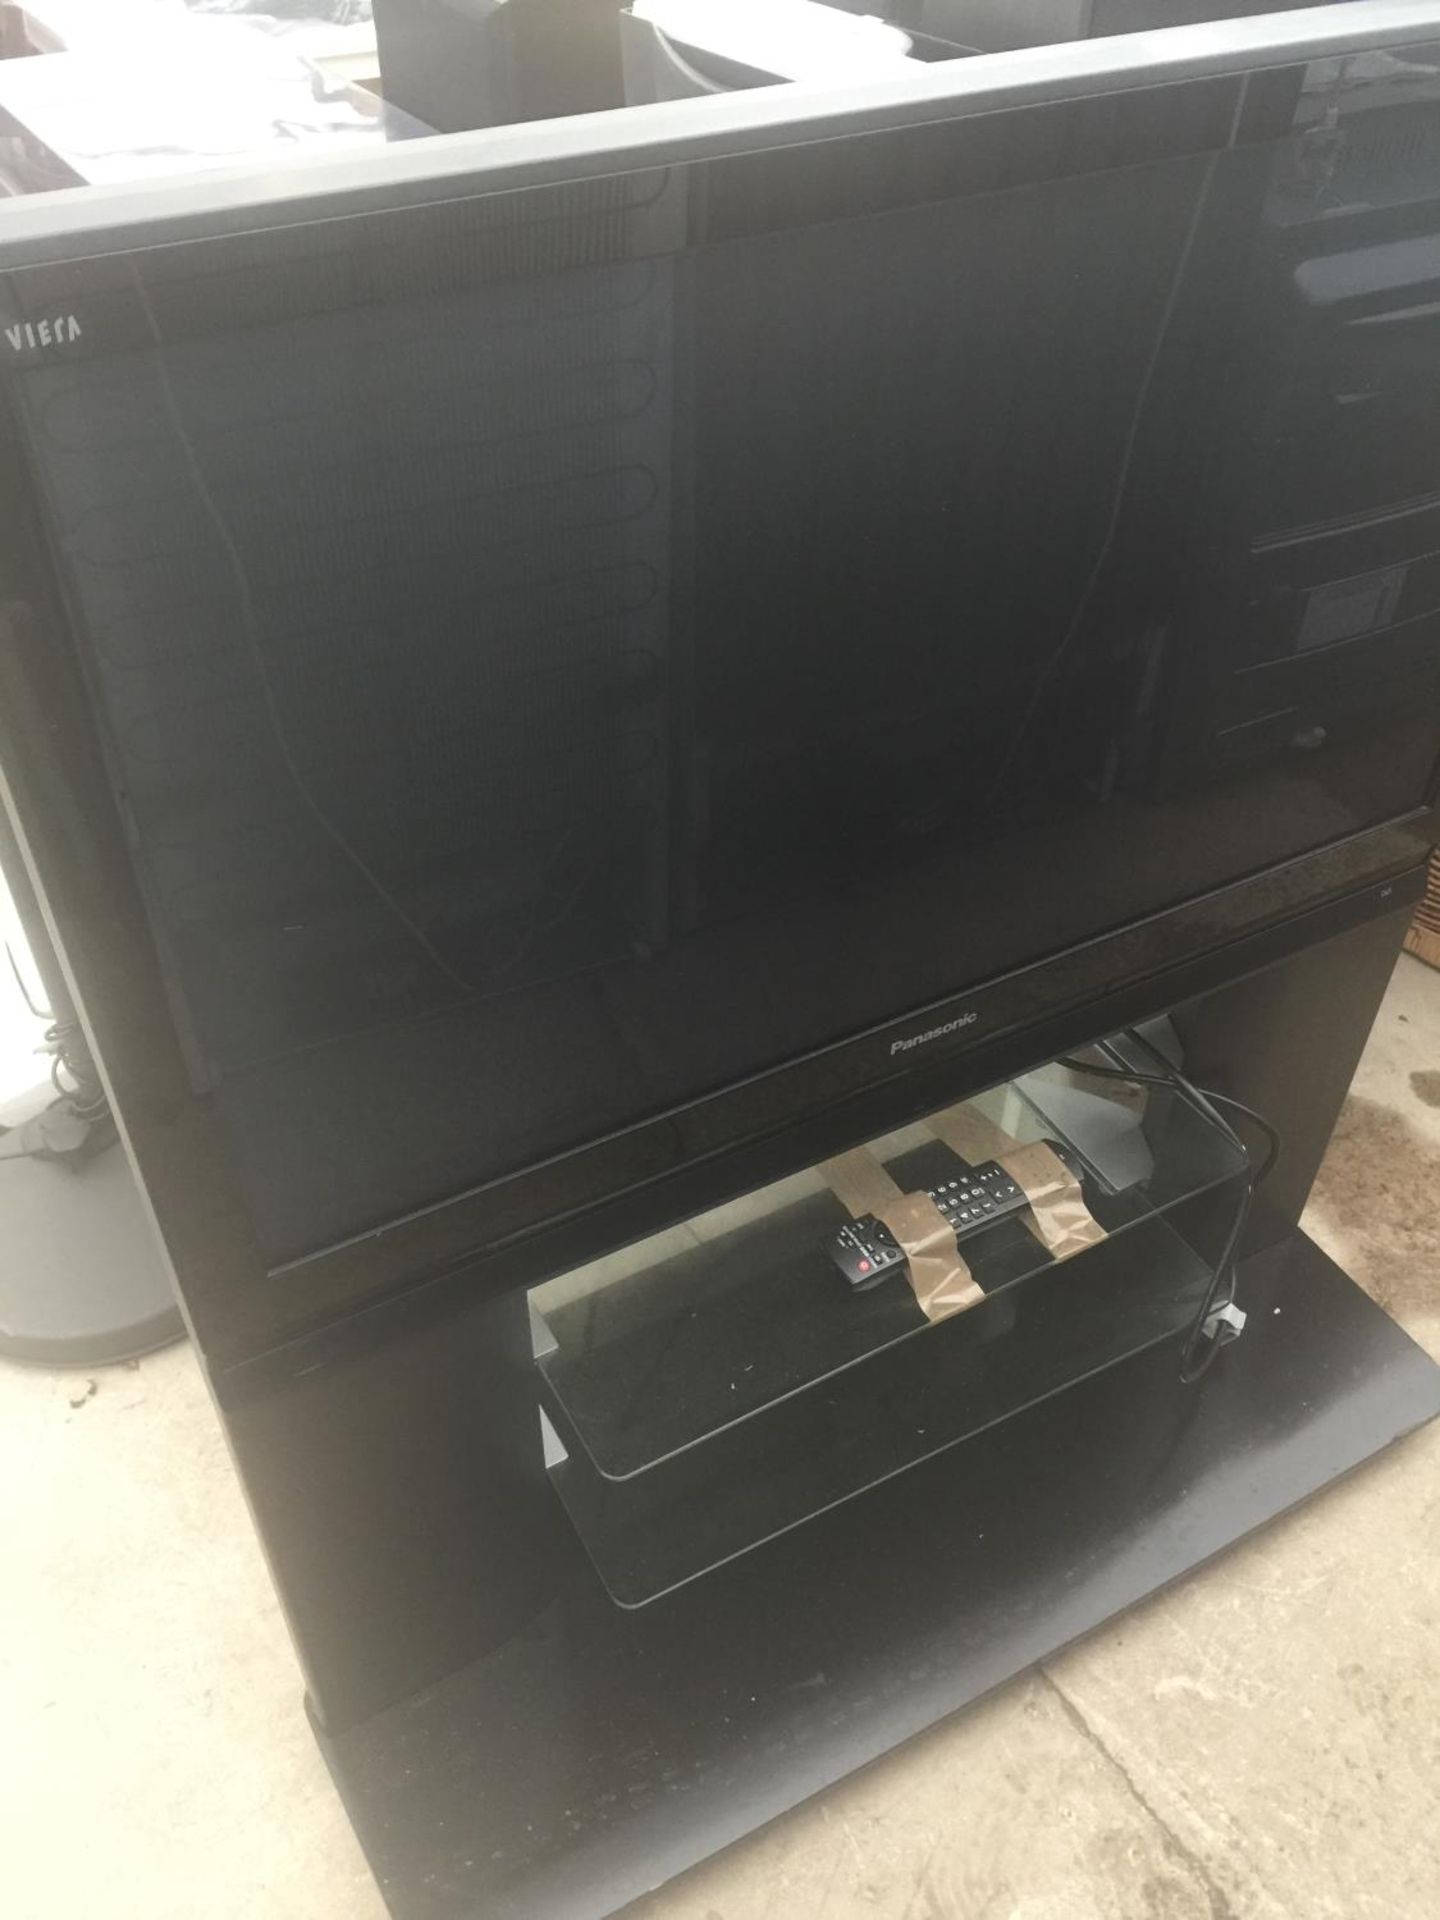 A 42" PANASONIC TELEVISION ON A STAND WITH REMOTE CONTROL